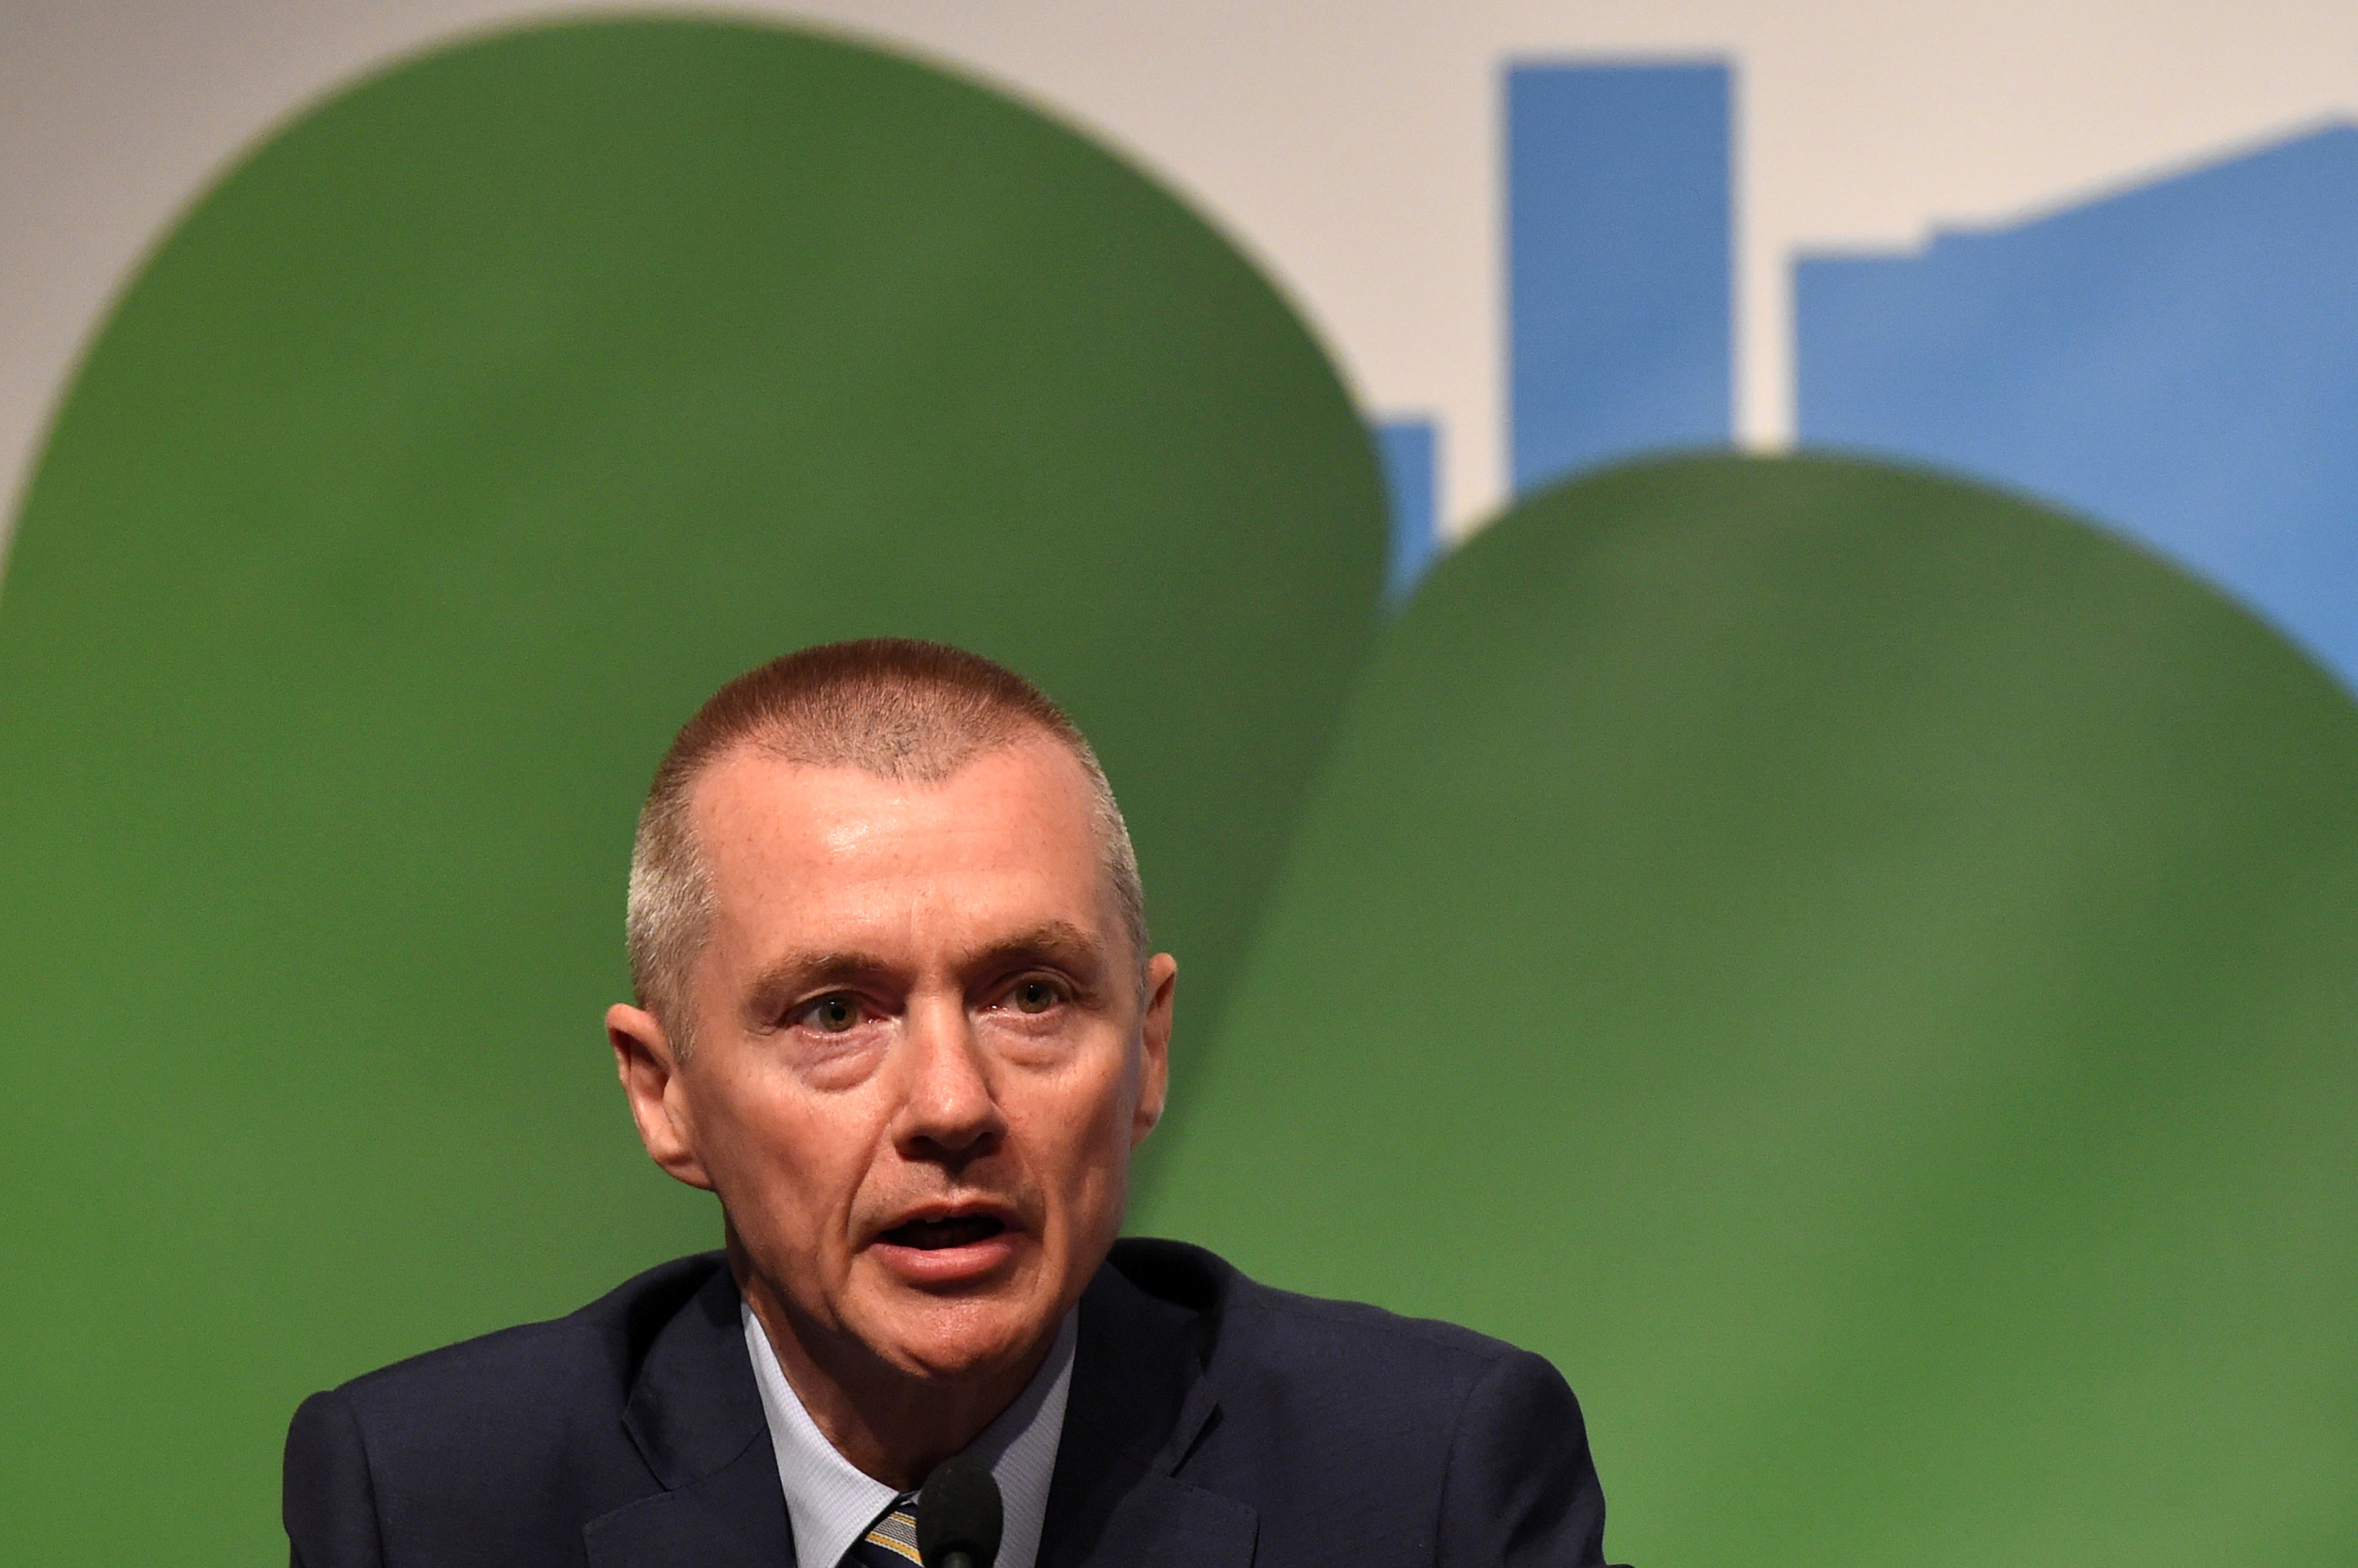 Willie Walsh speaks at the IATA annual general meeting in 2016, when he was CEO of International Airlines Group